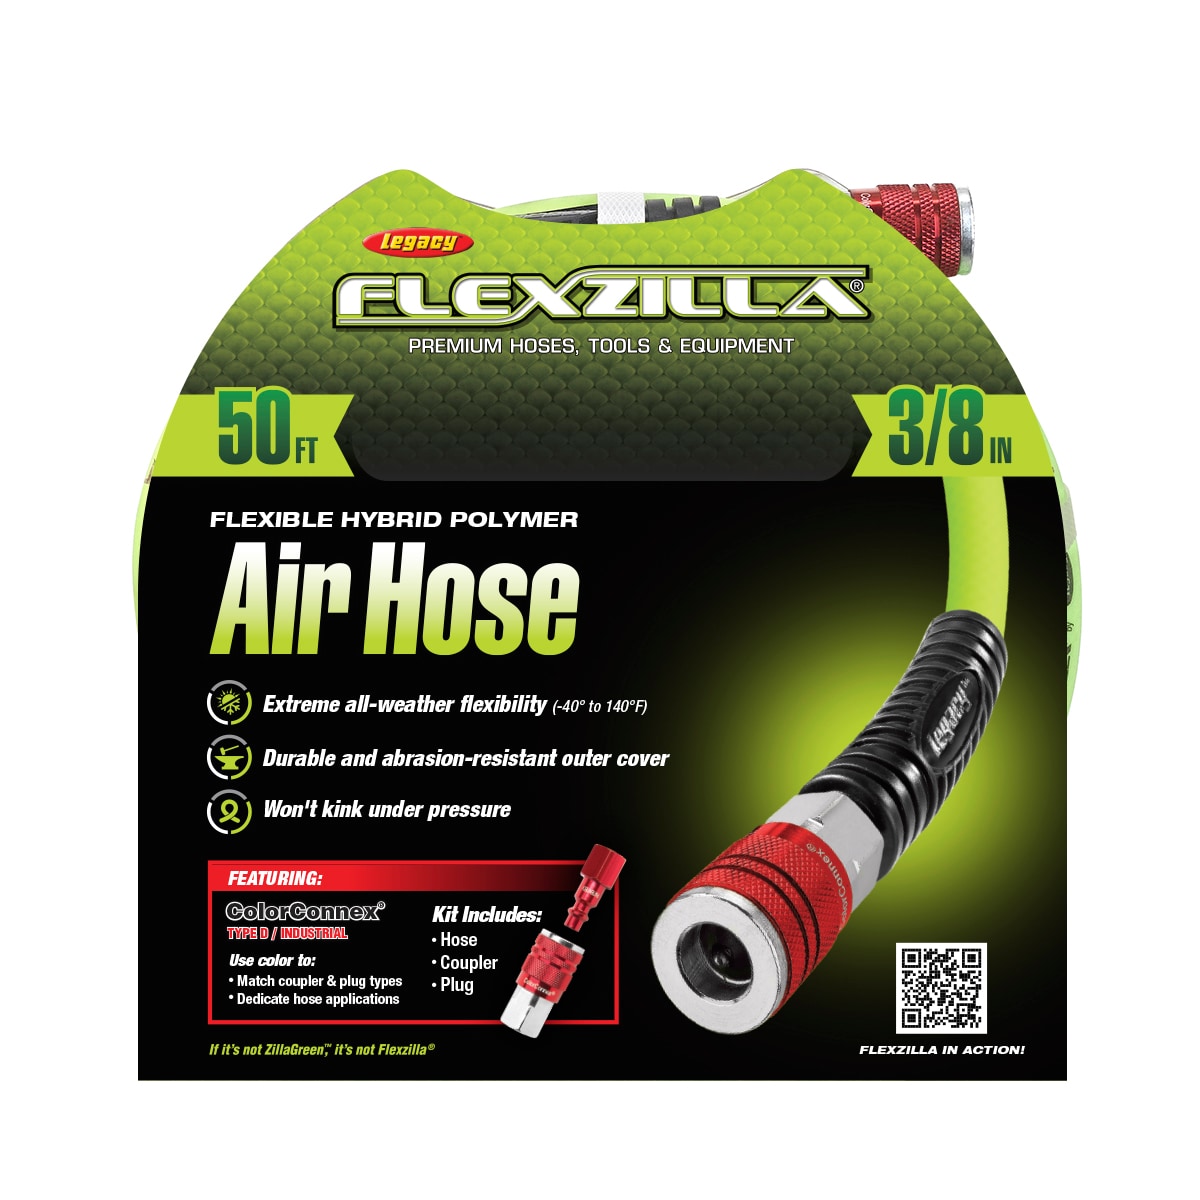 Flexzilla Air Hose, 3/8-in x 50-ft, with Colorconnex Coupler and 